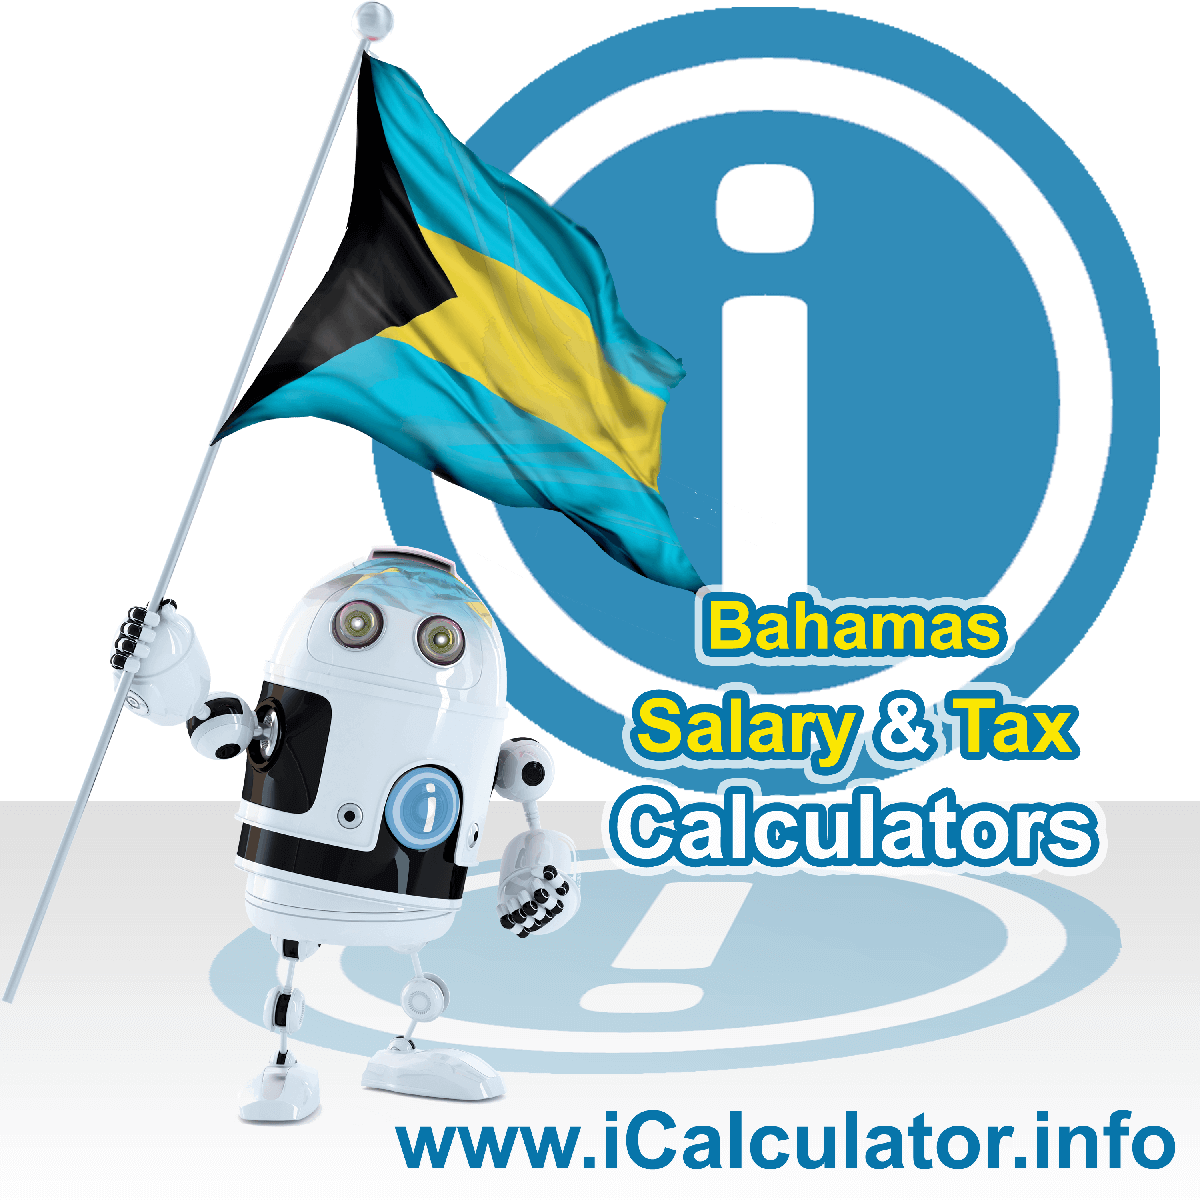 Bahamas Tax Calculator. This image shows the Bahamas flag and information relating to the tax formula for the Bahamas Salary Calculator